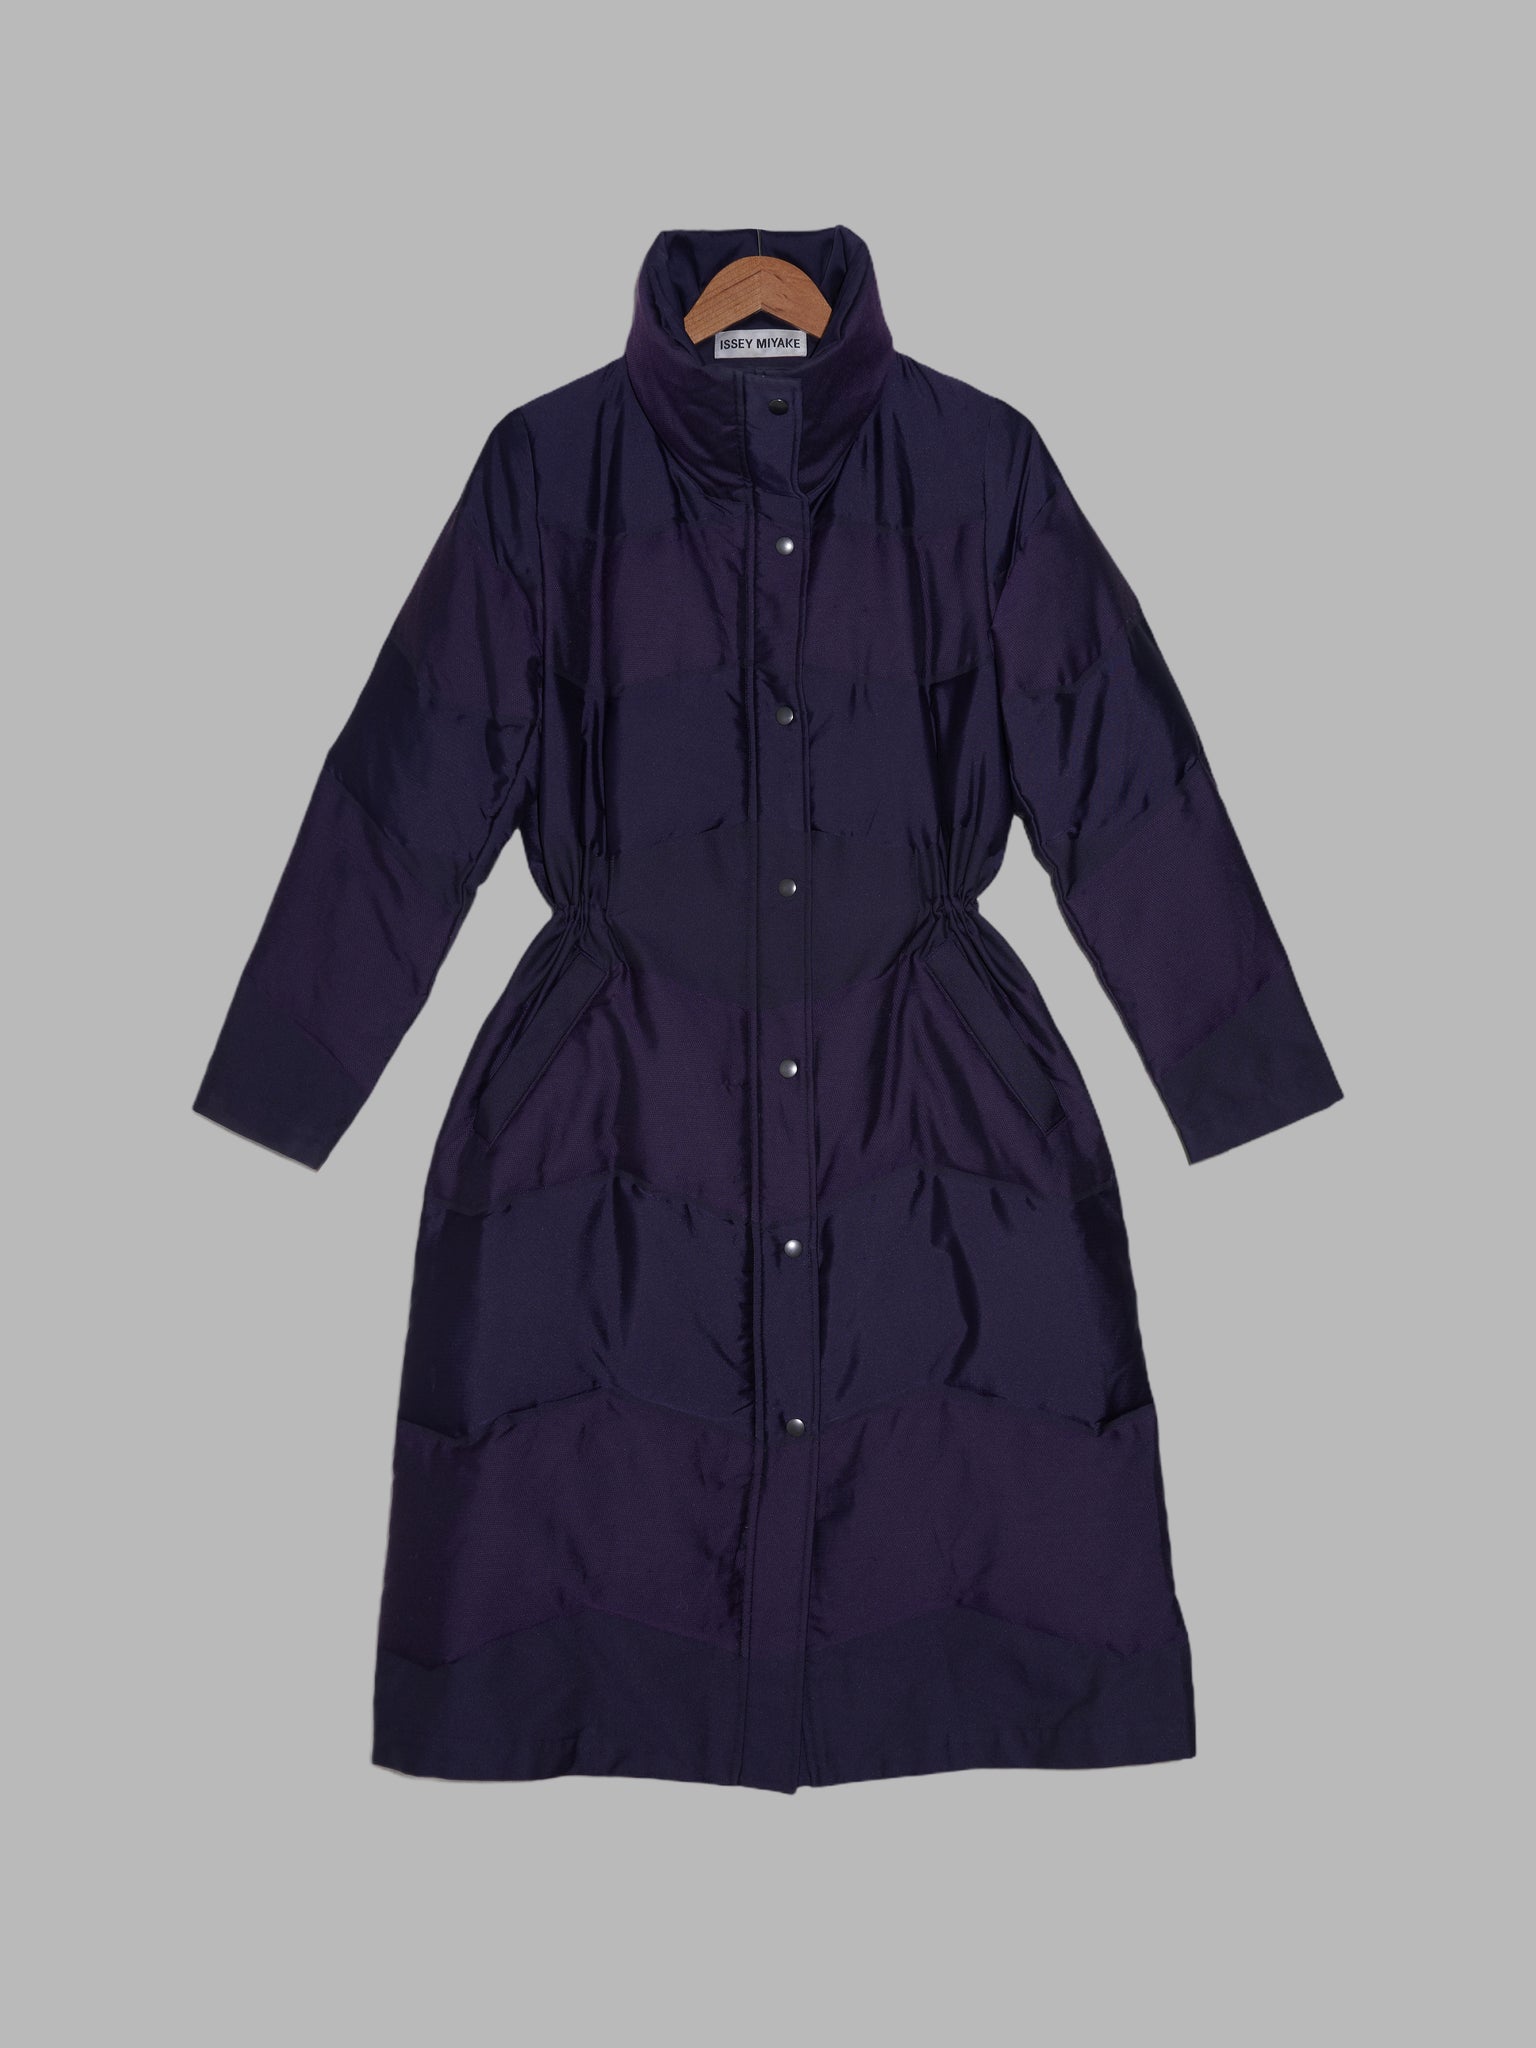 Issey Miyake panelled purple polyester high neck down puffer coat - size 3 L M